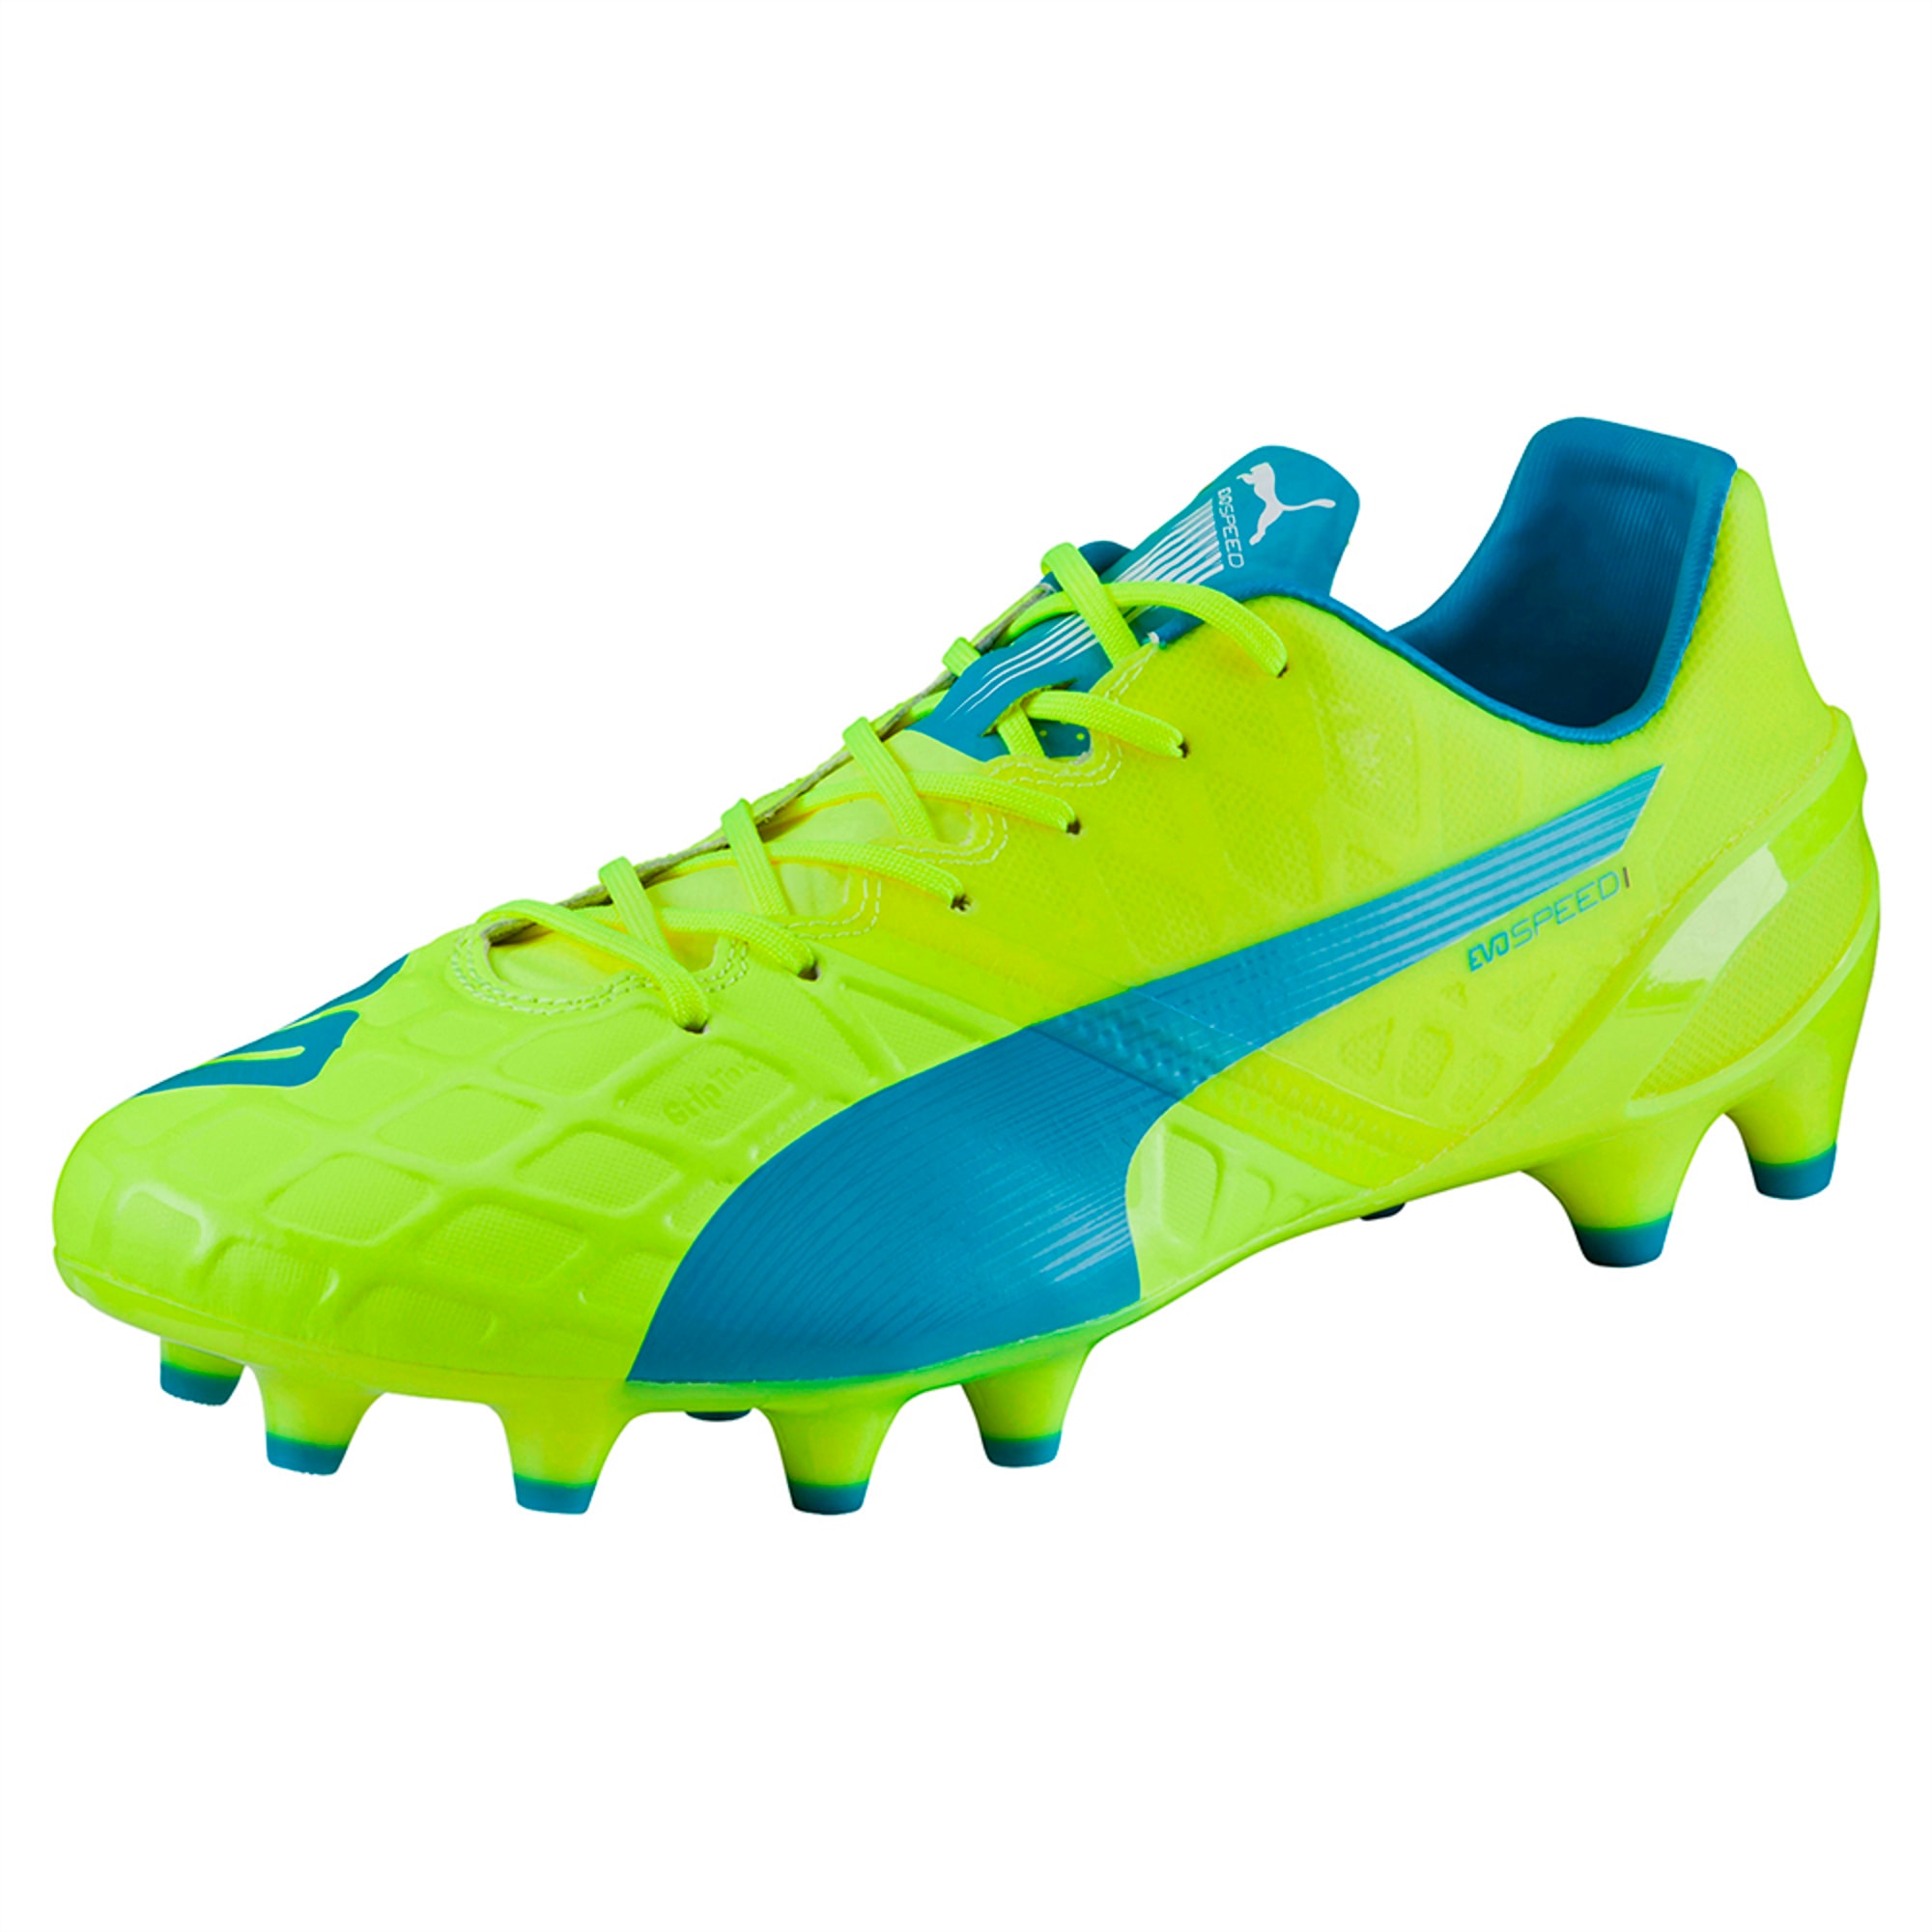 blue and yellow puma football boots